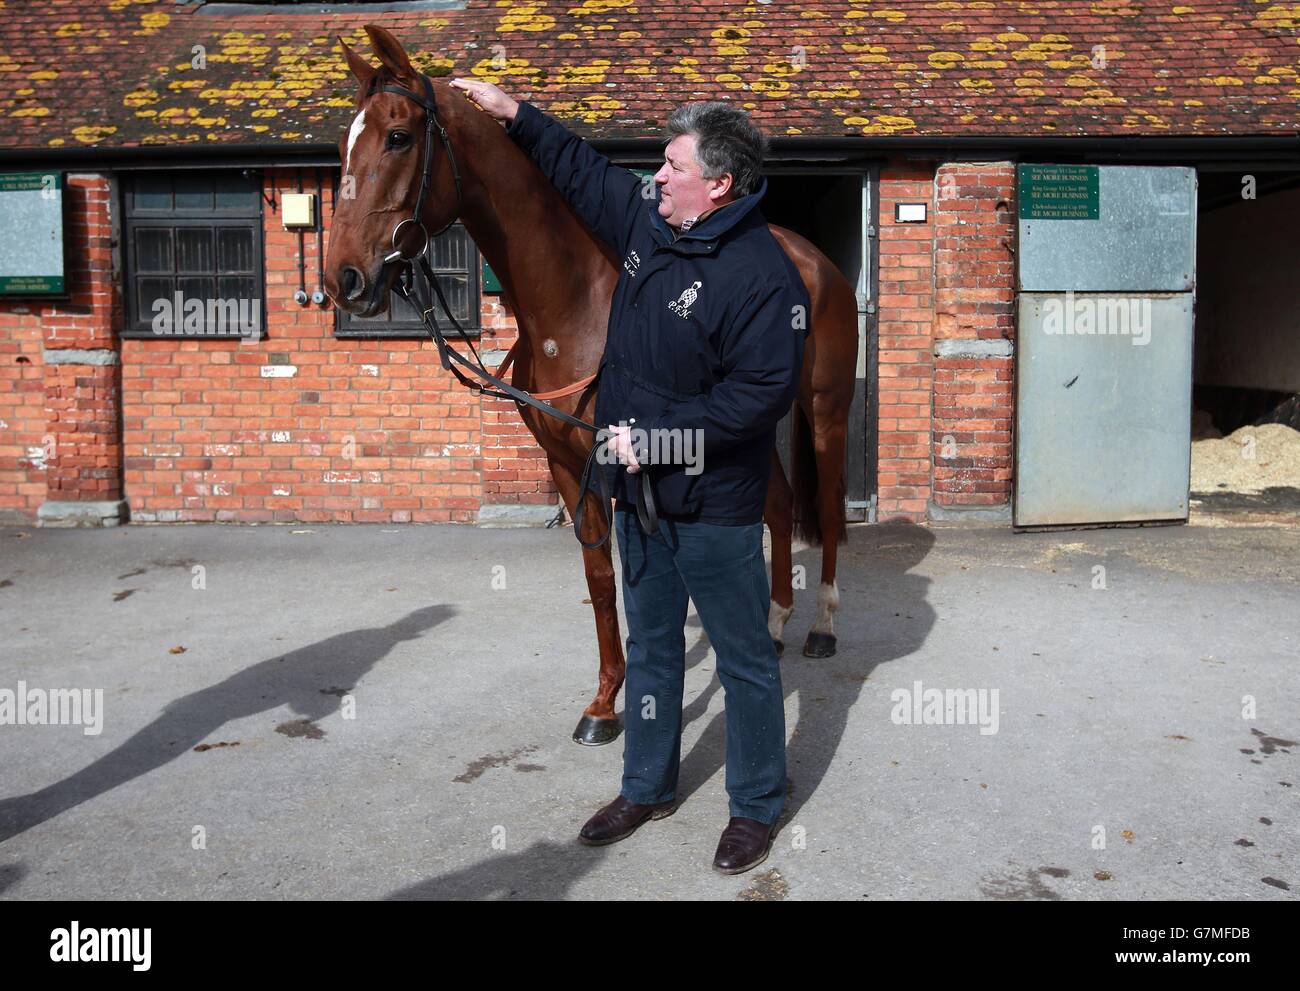 Trainer Paul Nicholls pictured with Silviniaco Conti during the visit to Manor Farm Stables, Ditcheat. Stock Photo